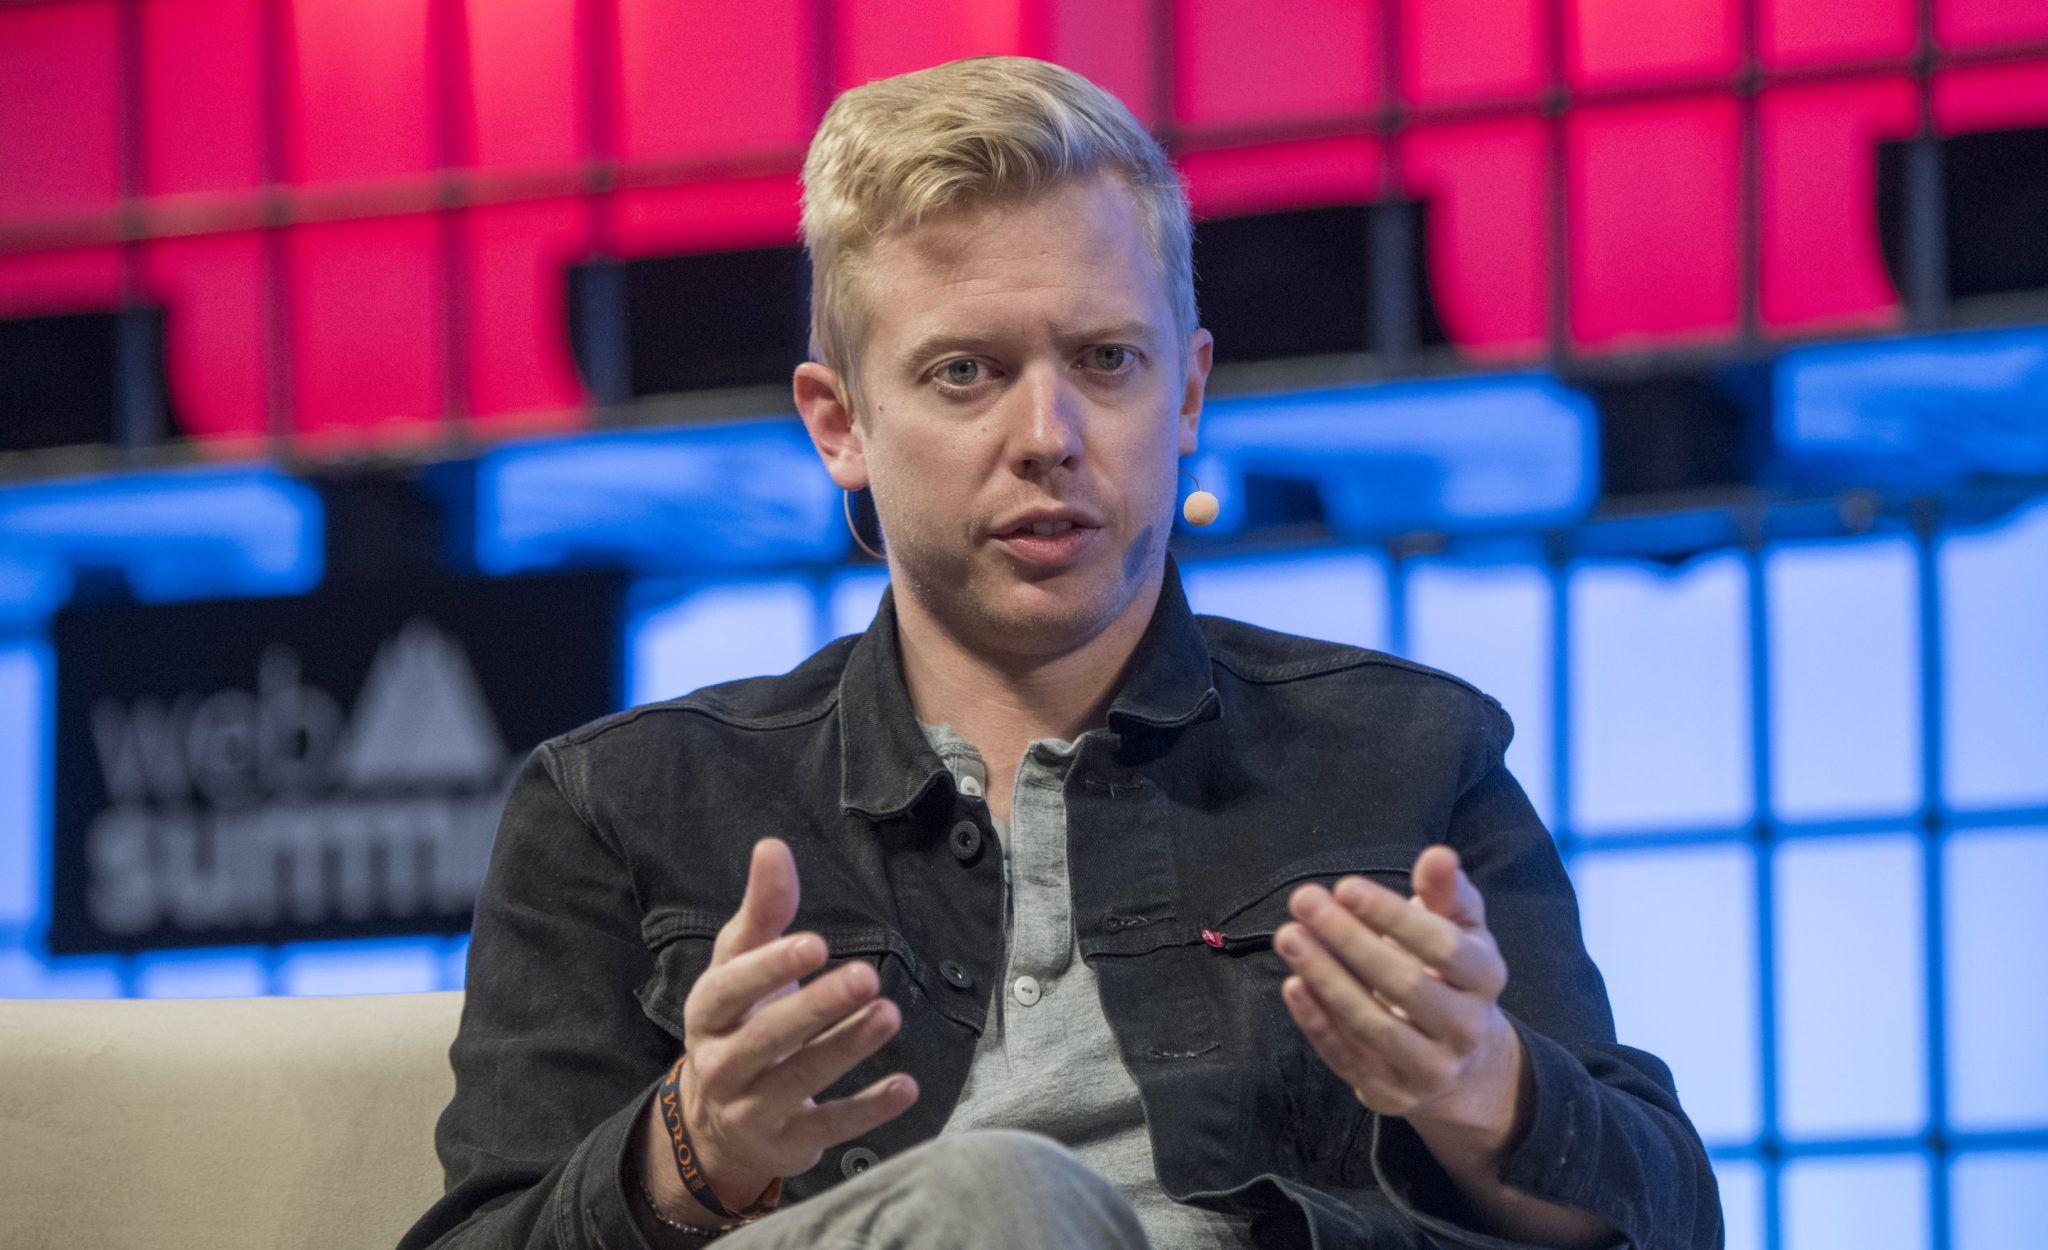 Reddit’s planned IPO aims to raise up to $748 million